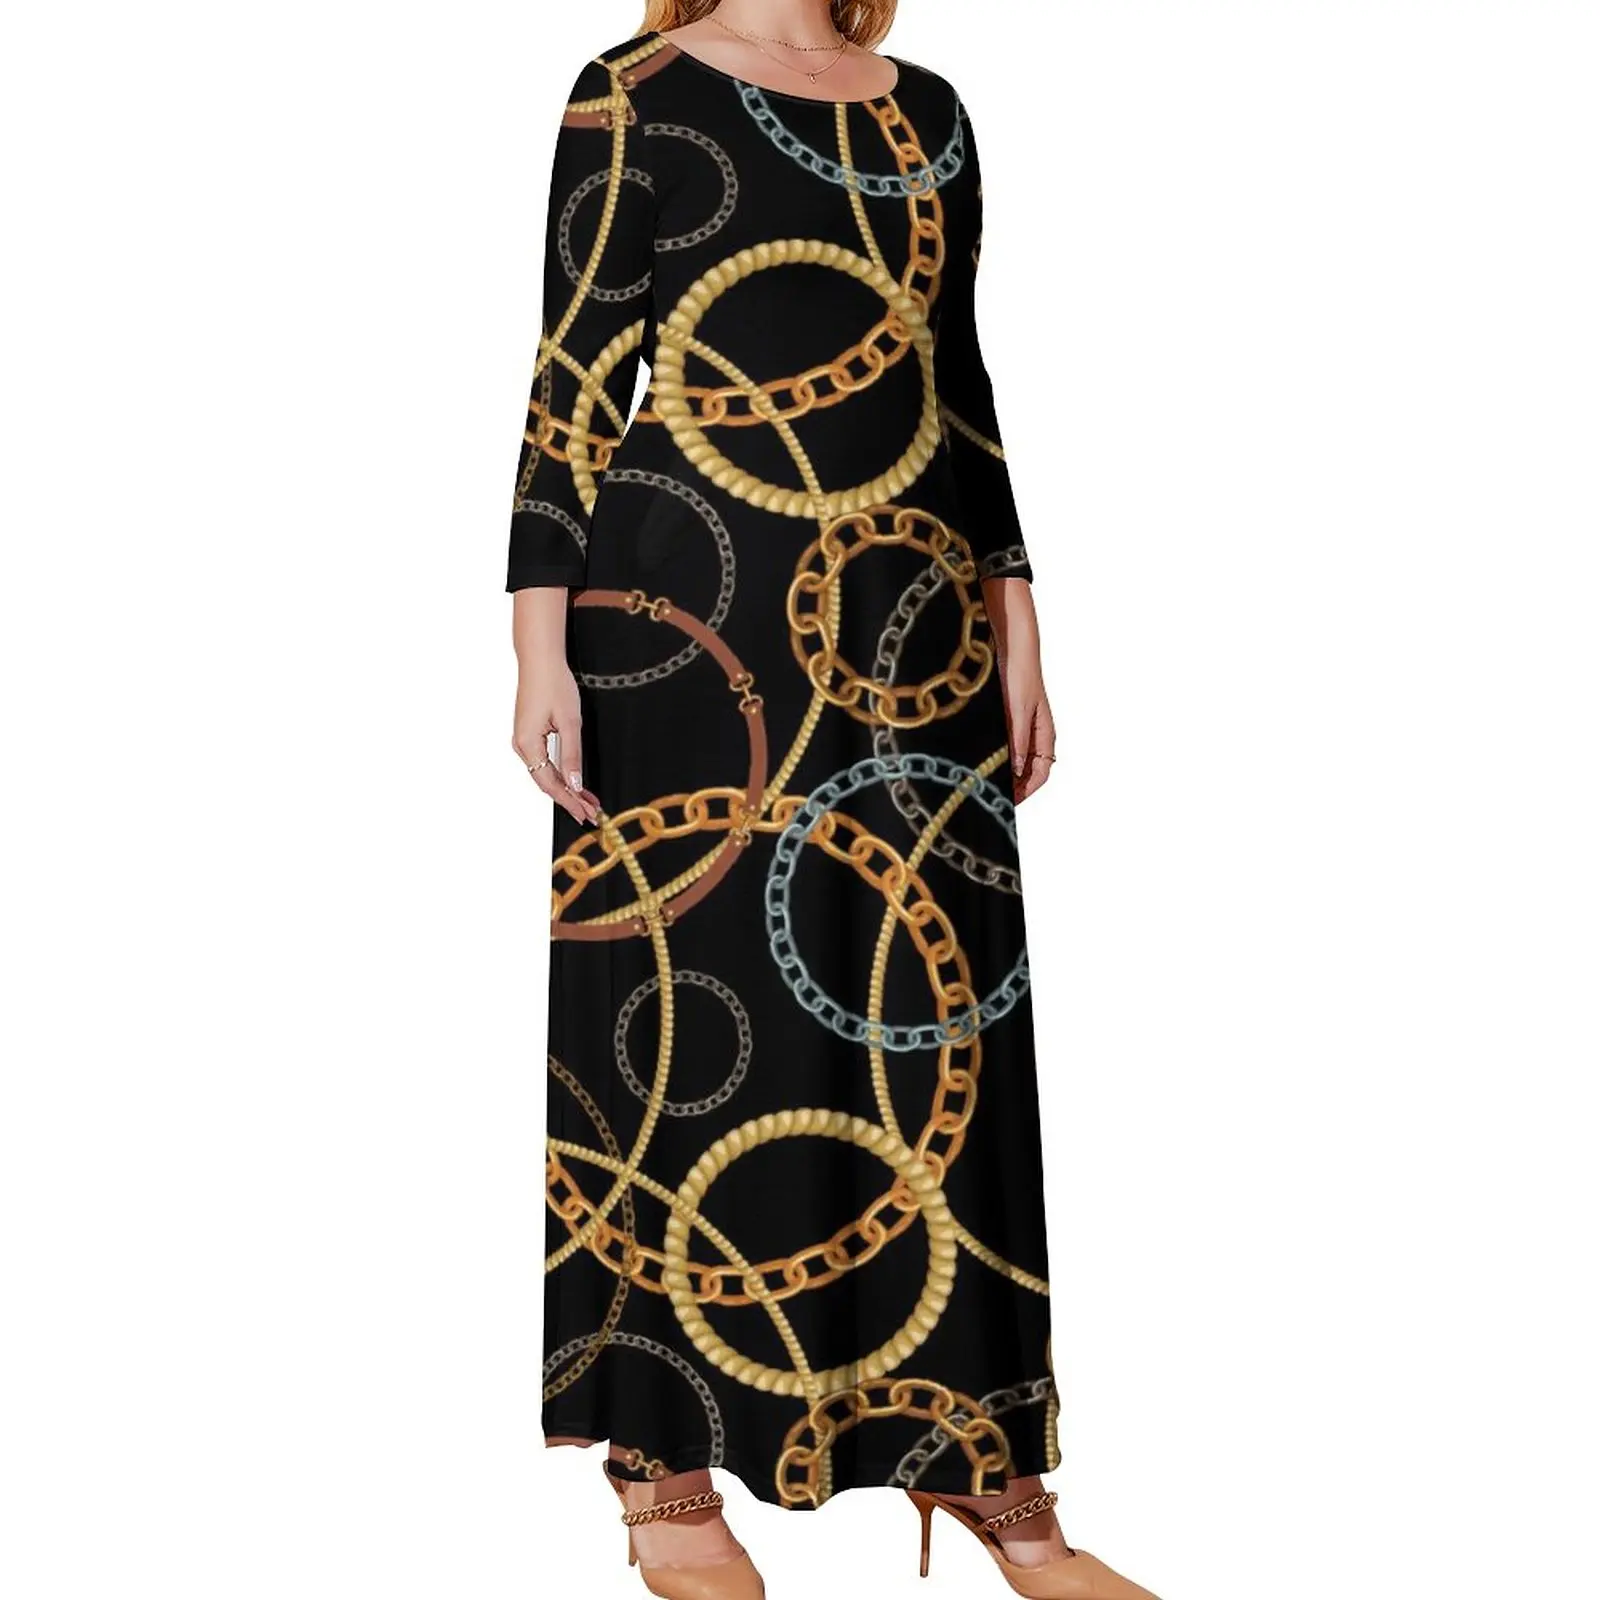 Chains with Ropes Dress Female Circle Chain Print Sexy Maxi Dress Streetwear Beach Long Dresses Graphic Vestido Plus Size 5XL